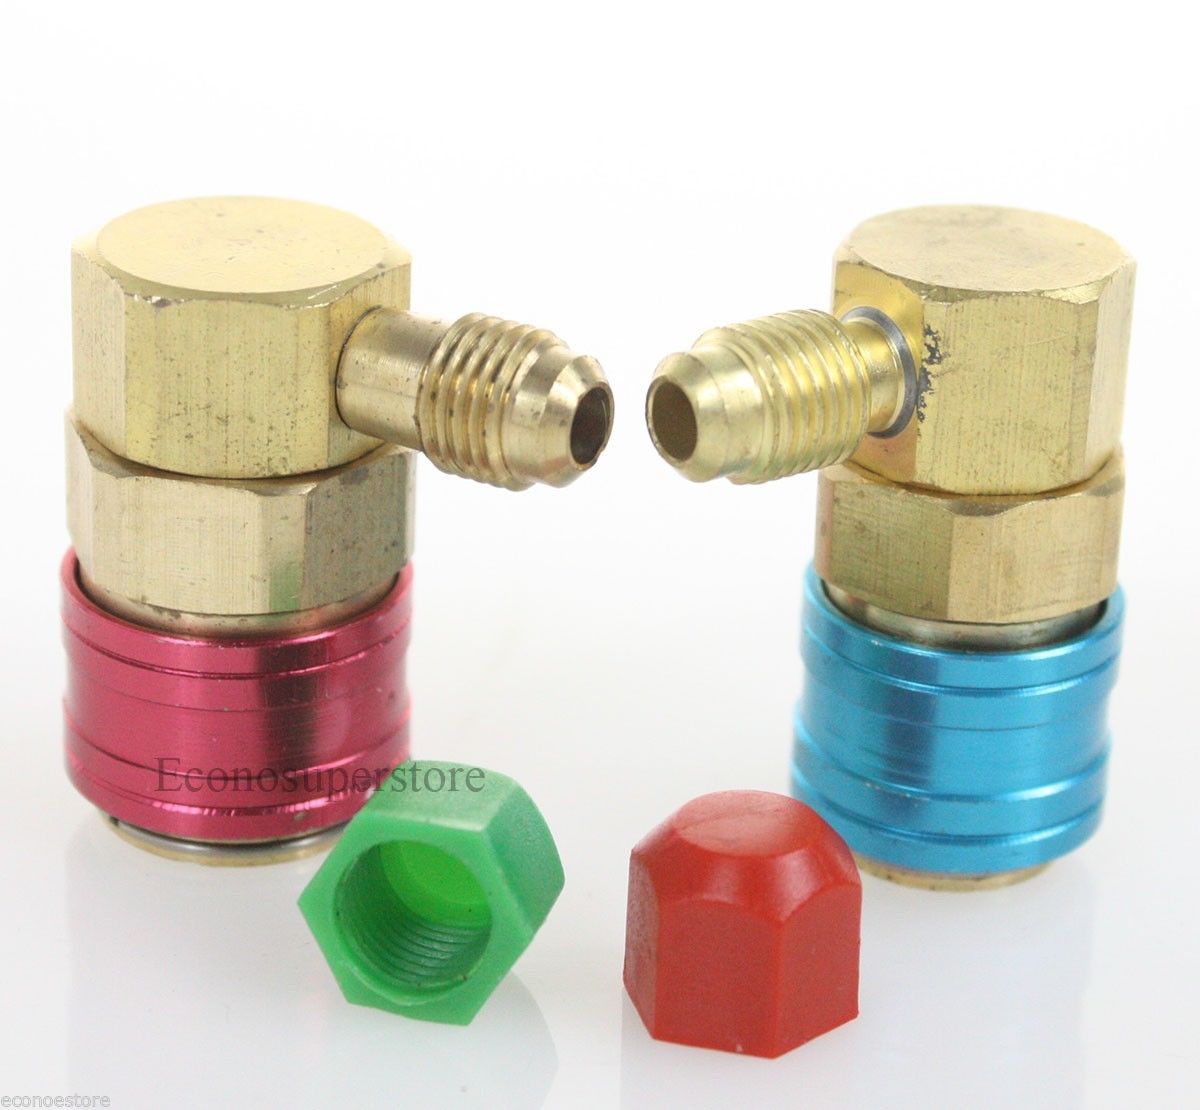 Sairis New High and Low Quick Coupler Connector Adapter R134A Conversion QC-15 Set Auto Car Free shipping blue&red 